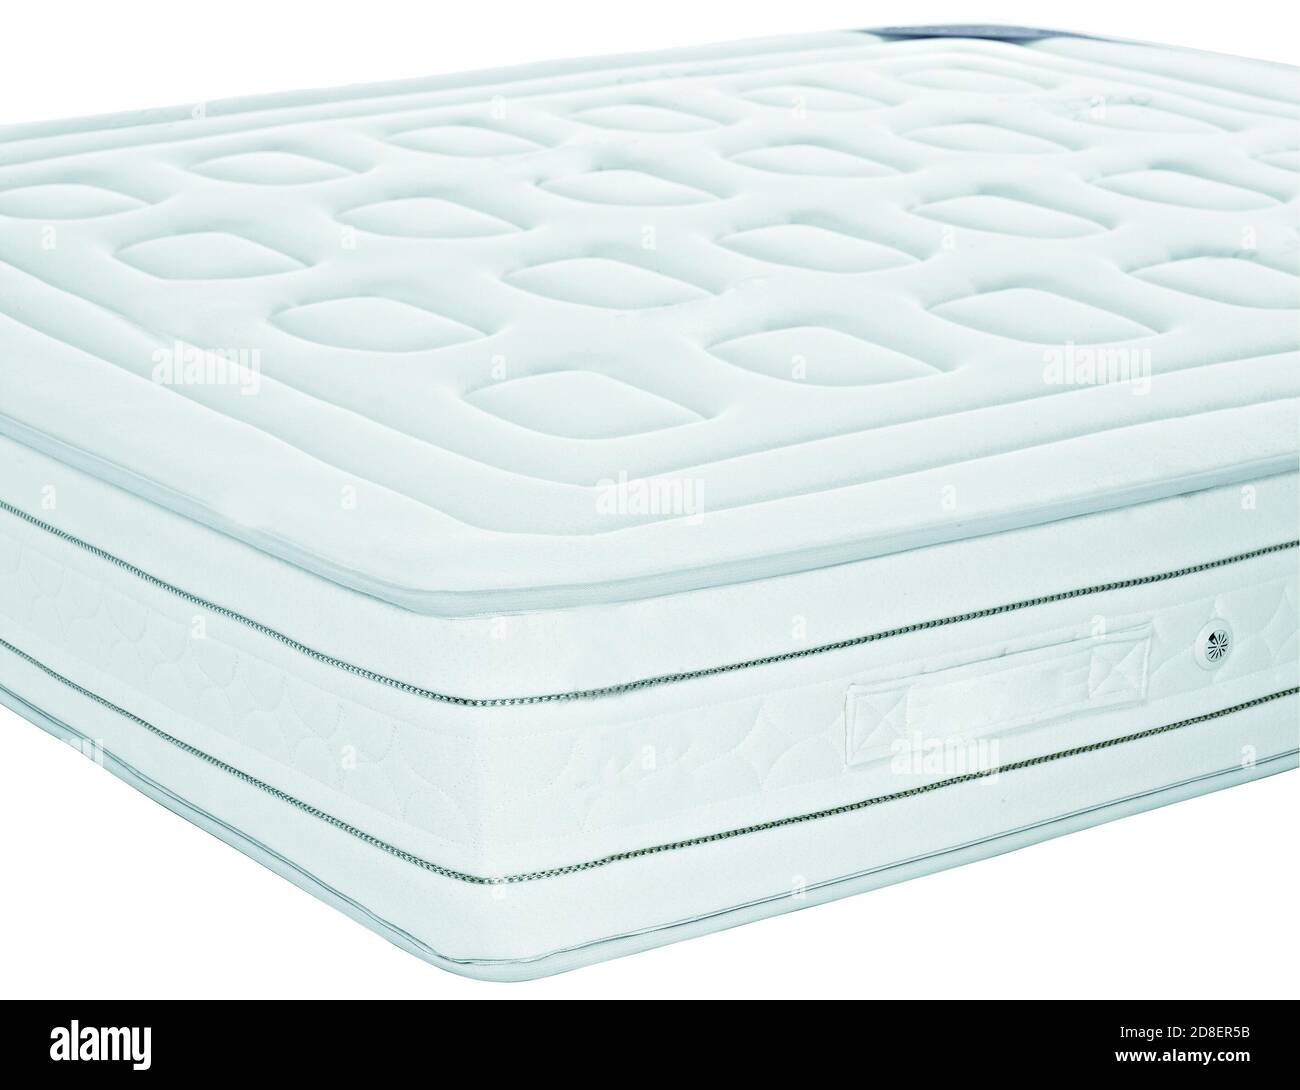 Double Mattress closeup. Isolated on a white background. Stock Photo